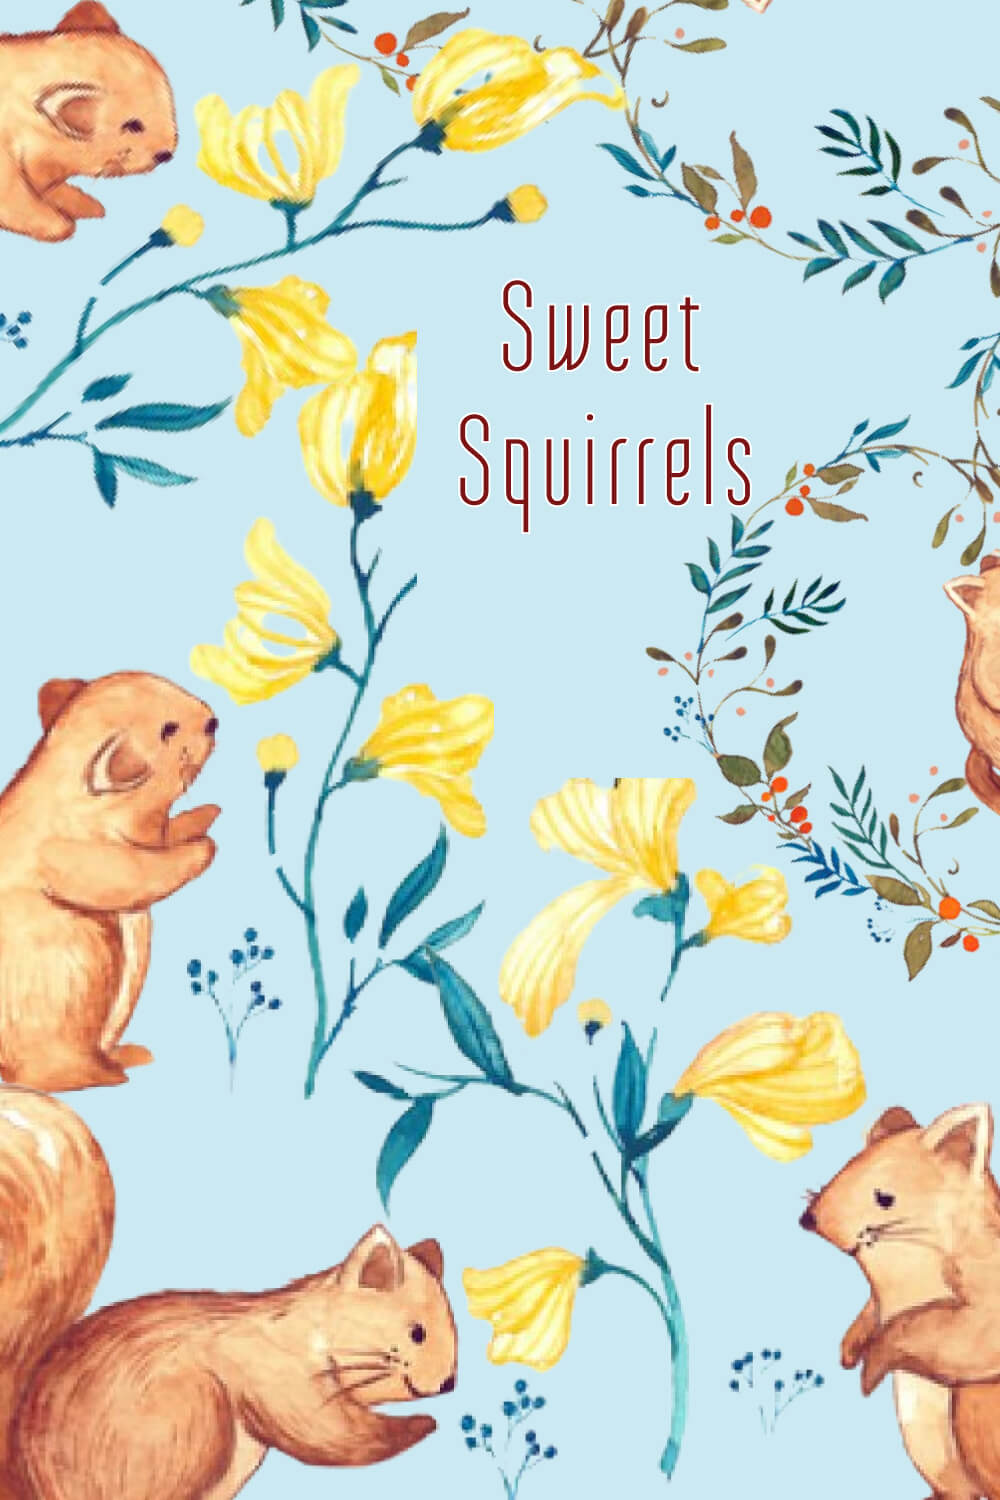 Watercolor painted sweet squirrels with plants on a blue background.